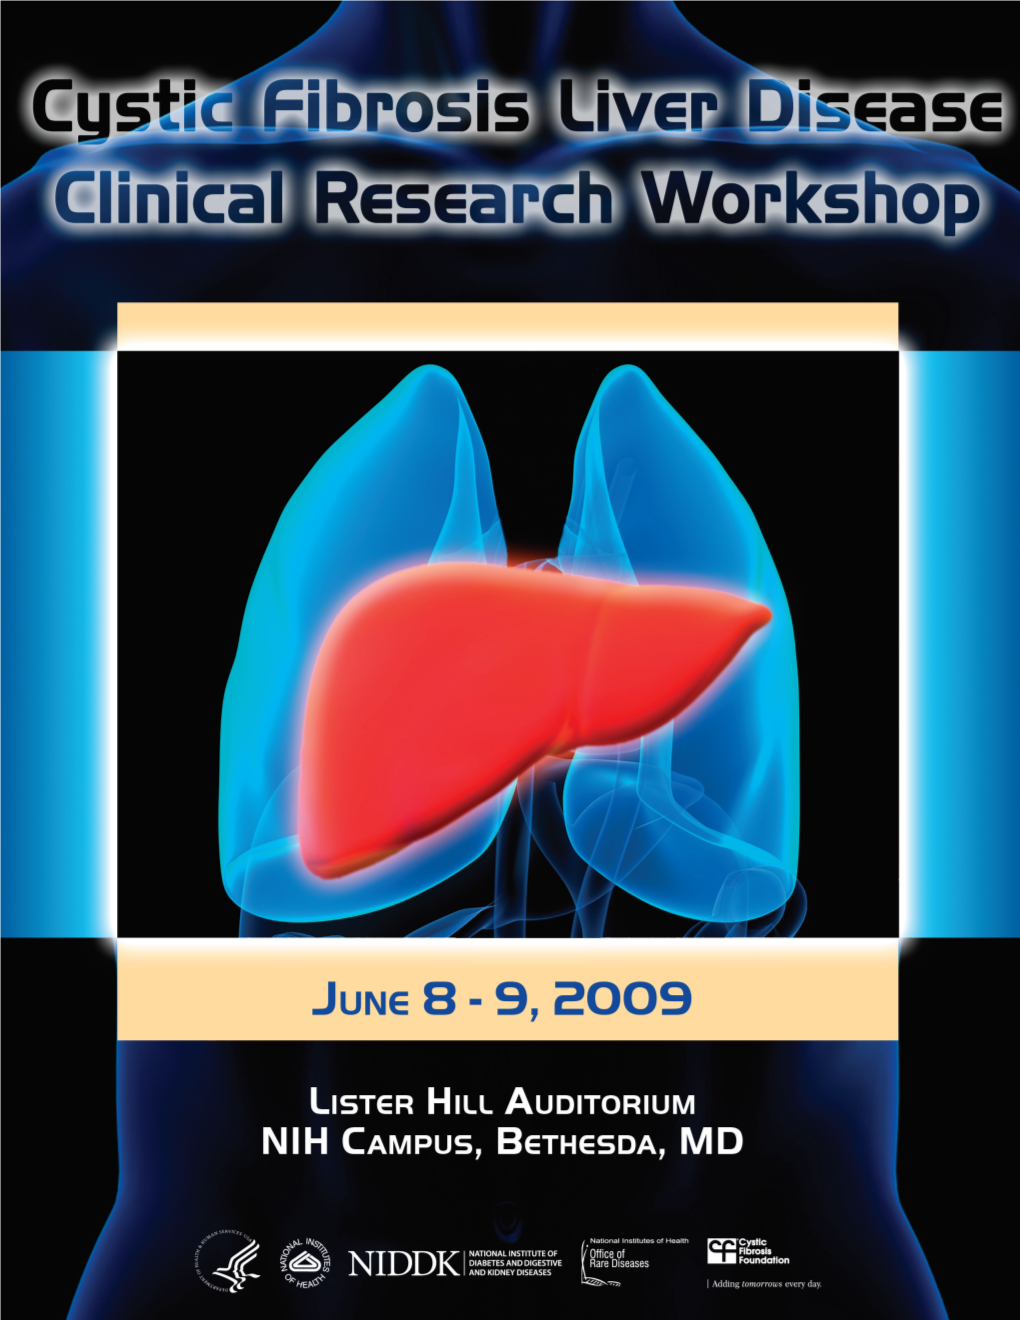 Cystic Fibrosis Liver Disease Clinical Research Workshop